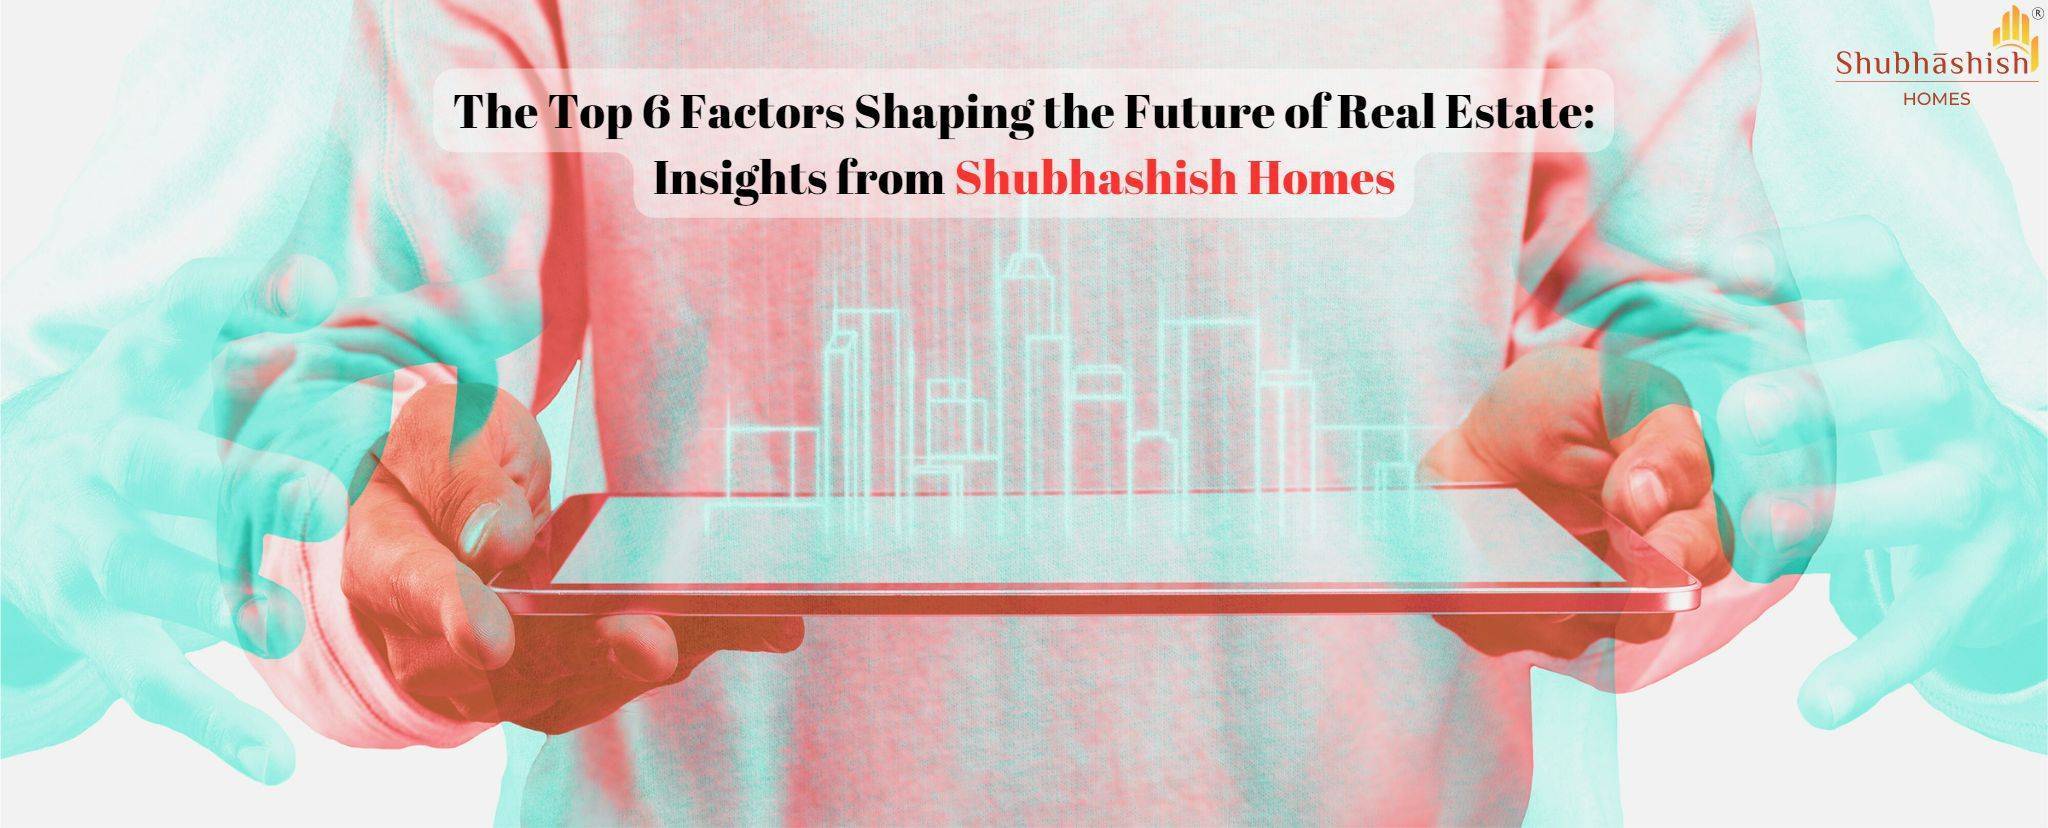 The Top 6 Factors Shaping the Future of Real Estate: Insights from Shubhashish Homes